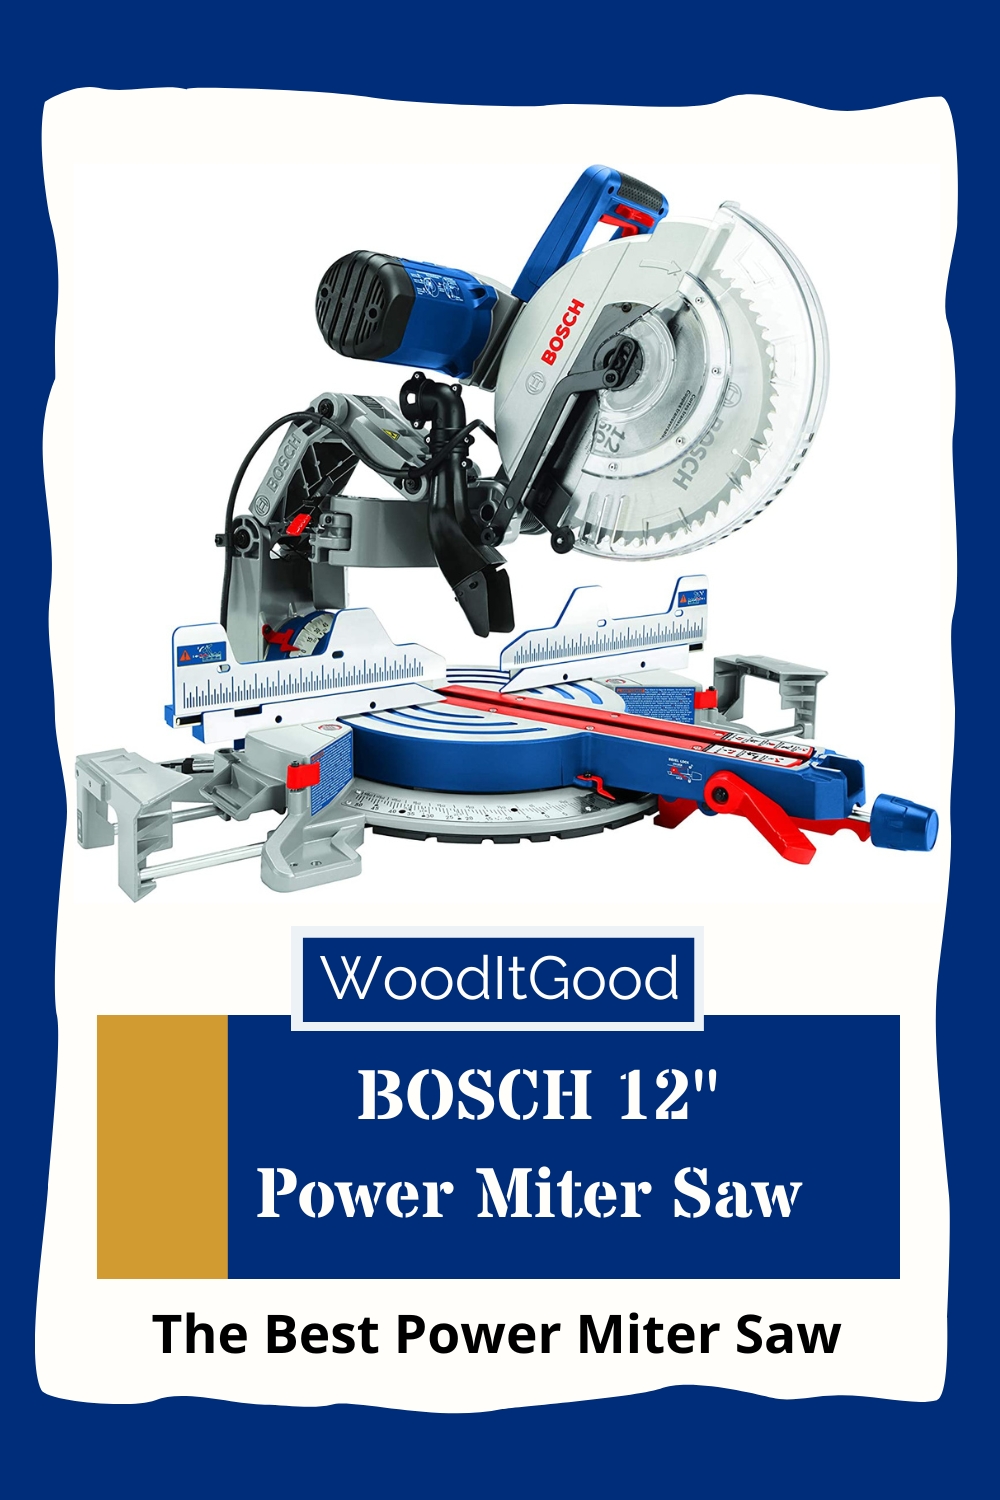 The BOSCH 12" Power Miter Saw (GCM12SD) Is The Best